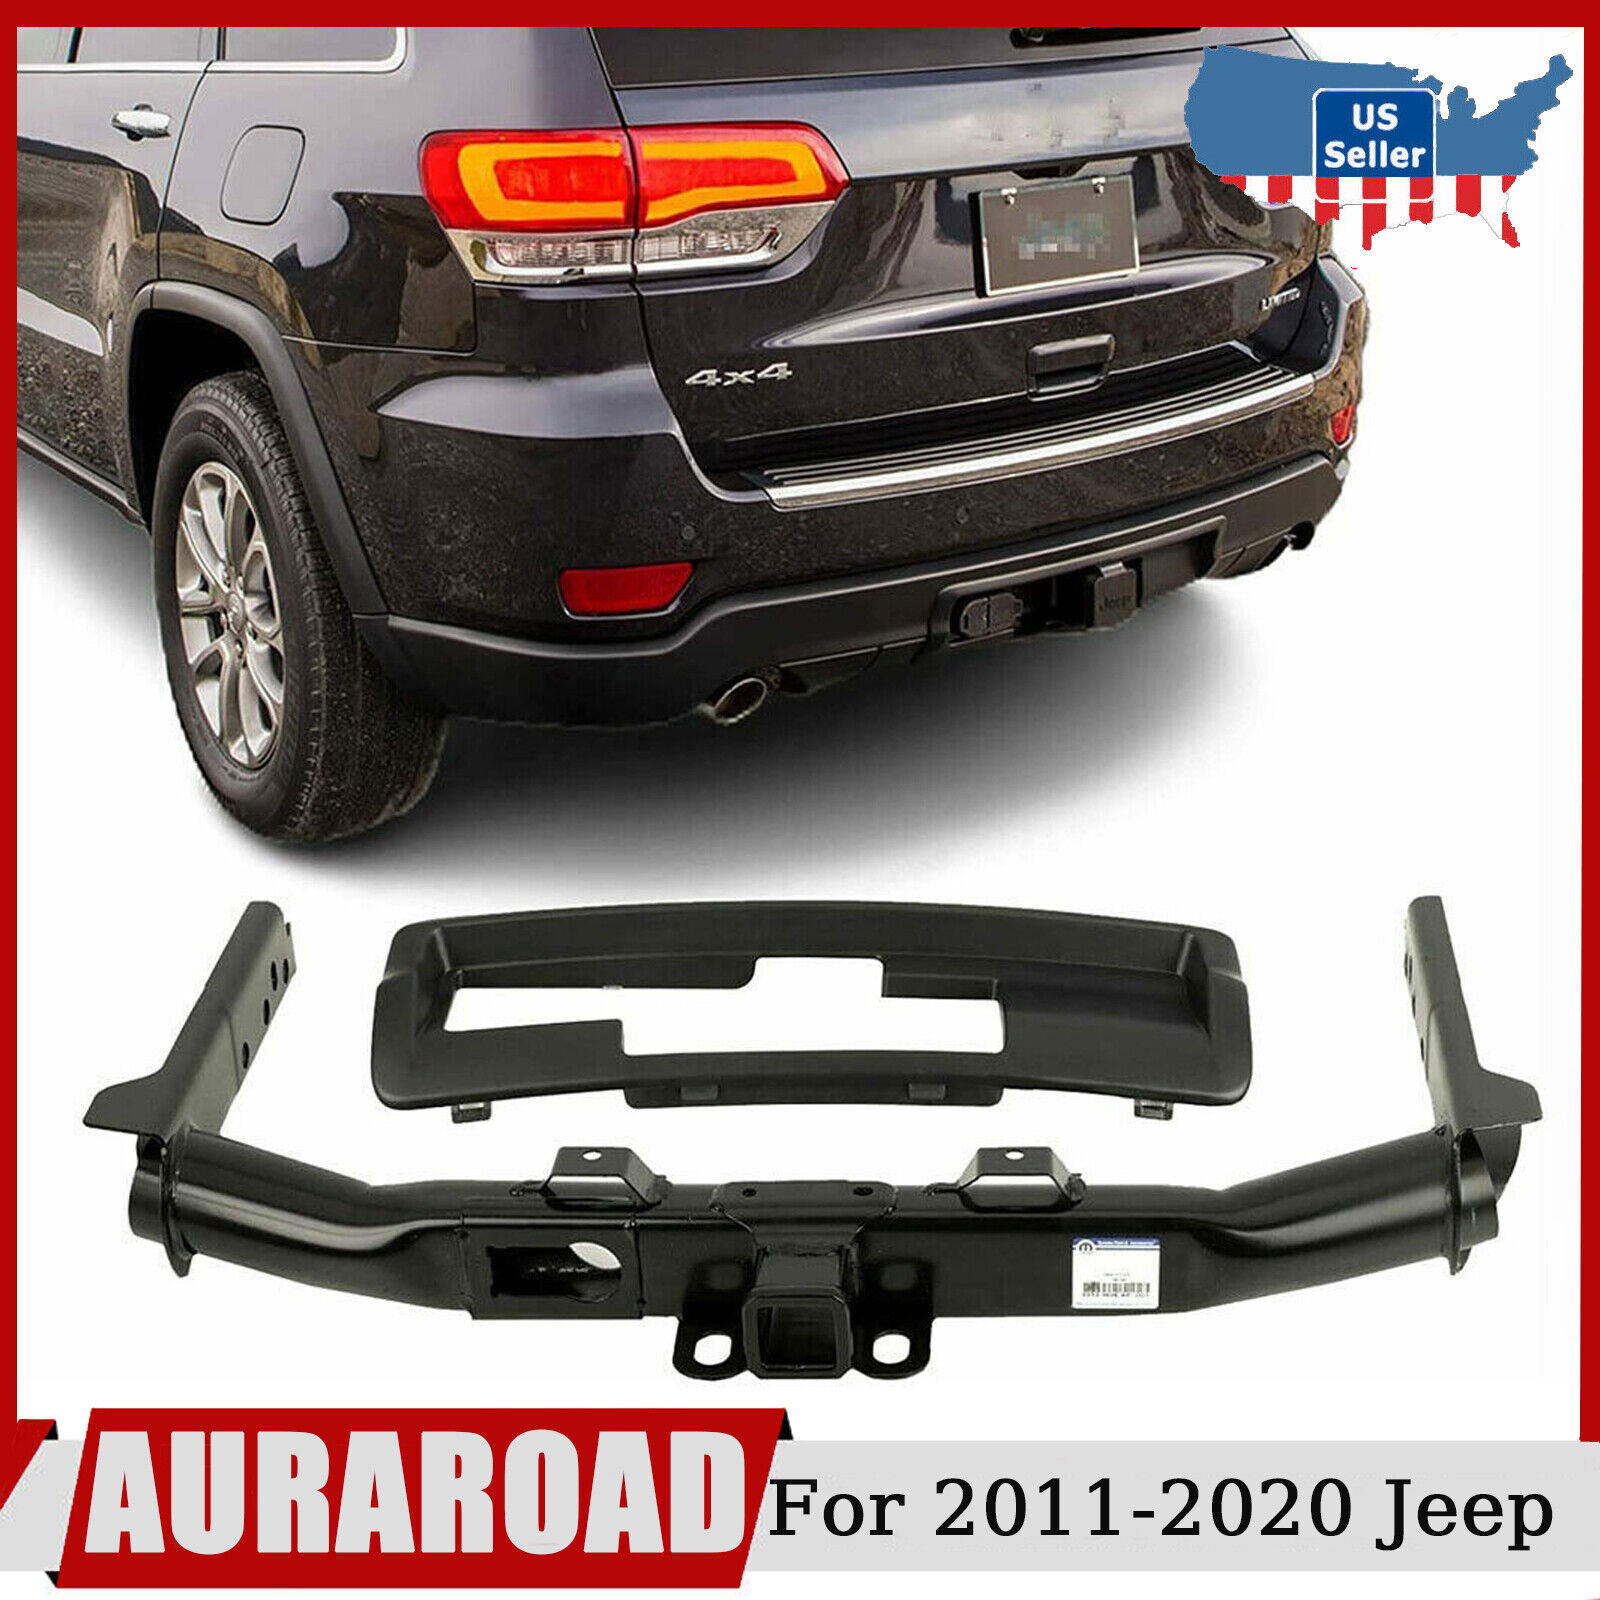 Fit For 2011-2020 Jeep Grand Cherokee Rear Trailer Receiver Towing Hitch Plug US